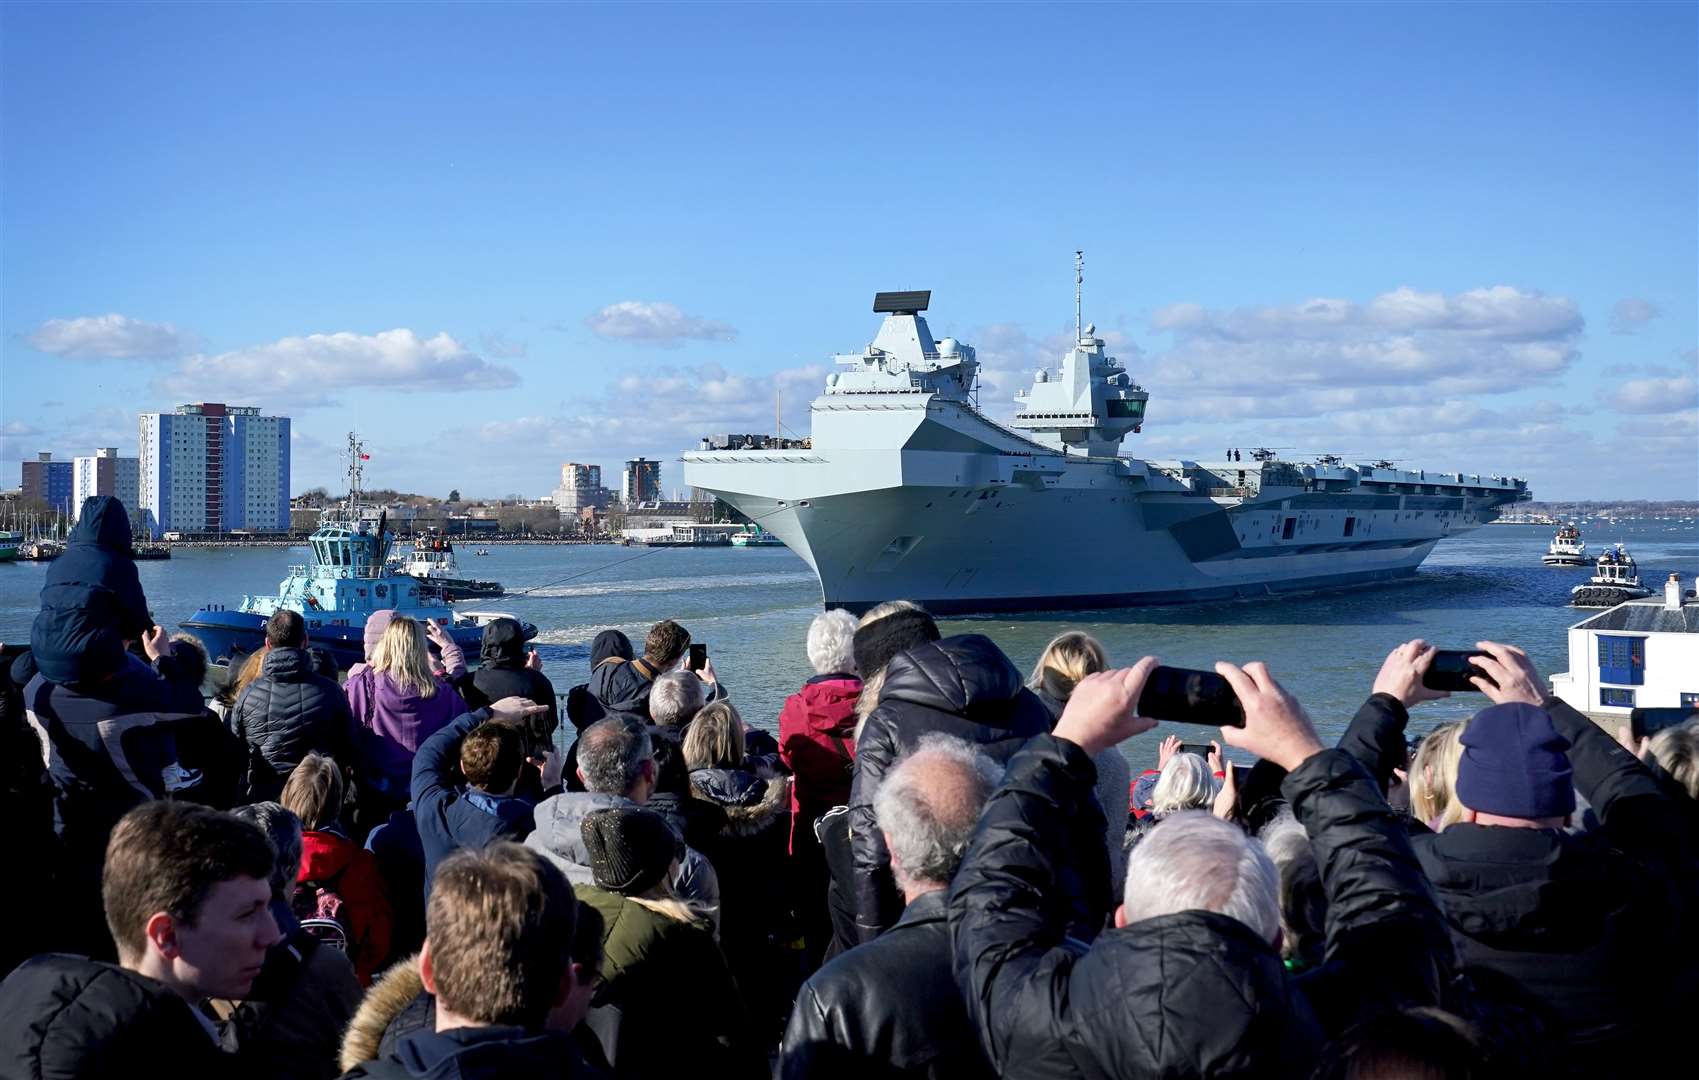 Crowds watch as the Royal Navy aircraft carrier HMS Prince of Wales sets sail from Portsmouth Harbour on Monday (Gareth Fuller/PA)